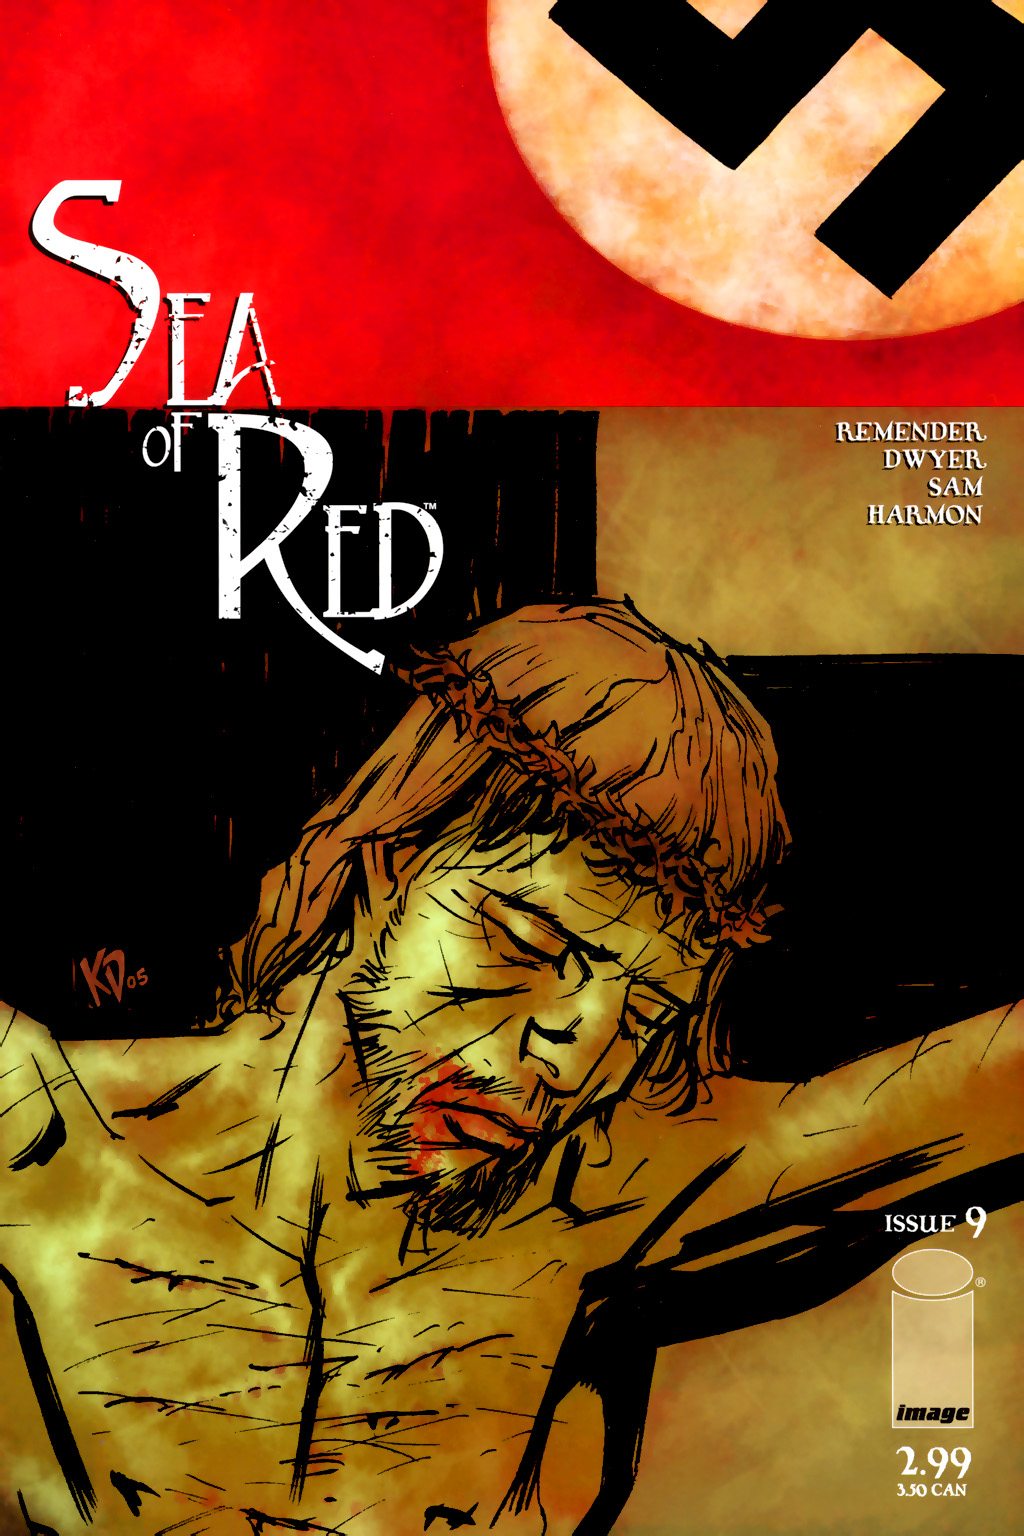 Sea of Red #9 